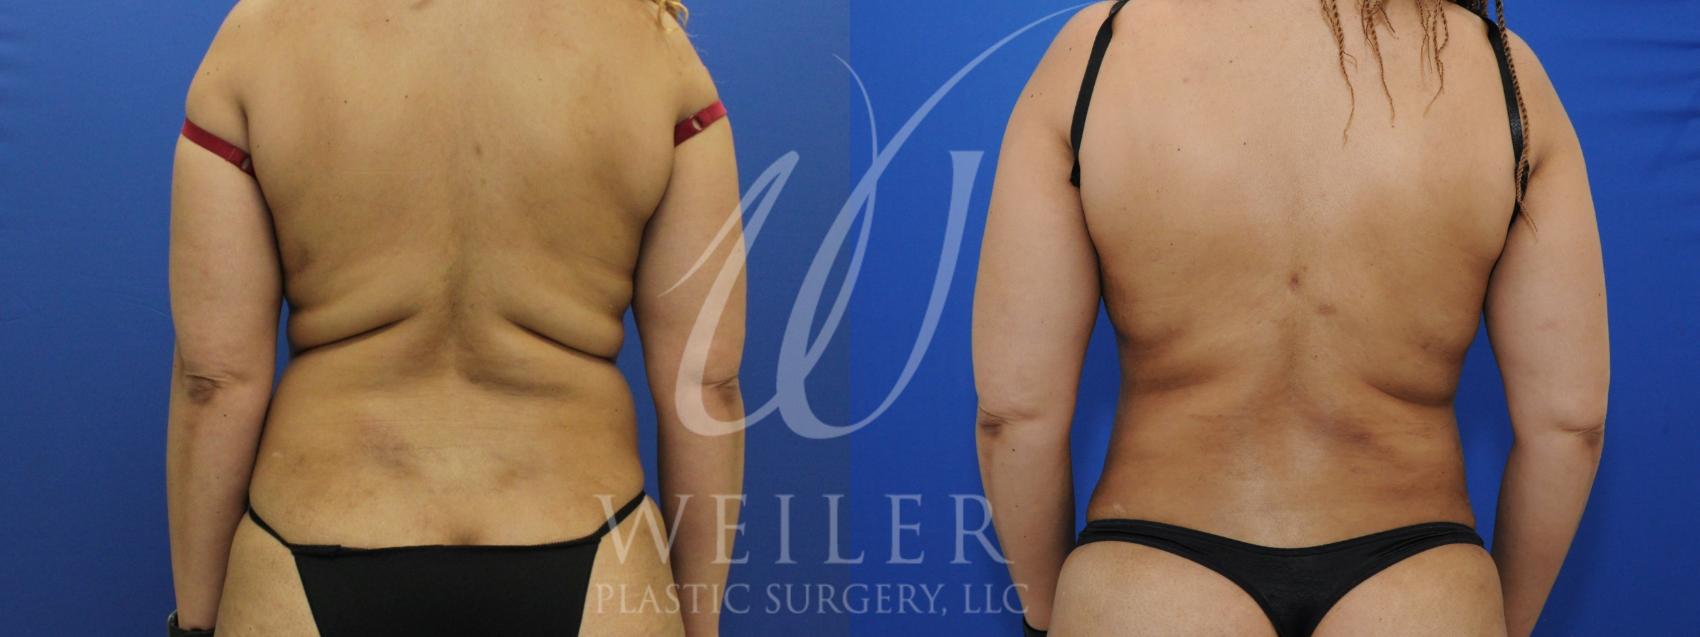 Before & After Liposuction Case 957 Back View in Baton Rouge, New Orleans, & Lafayette, Louisiana